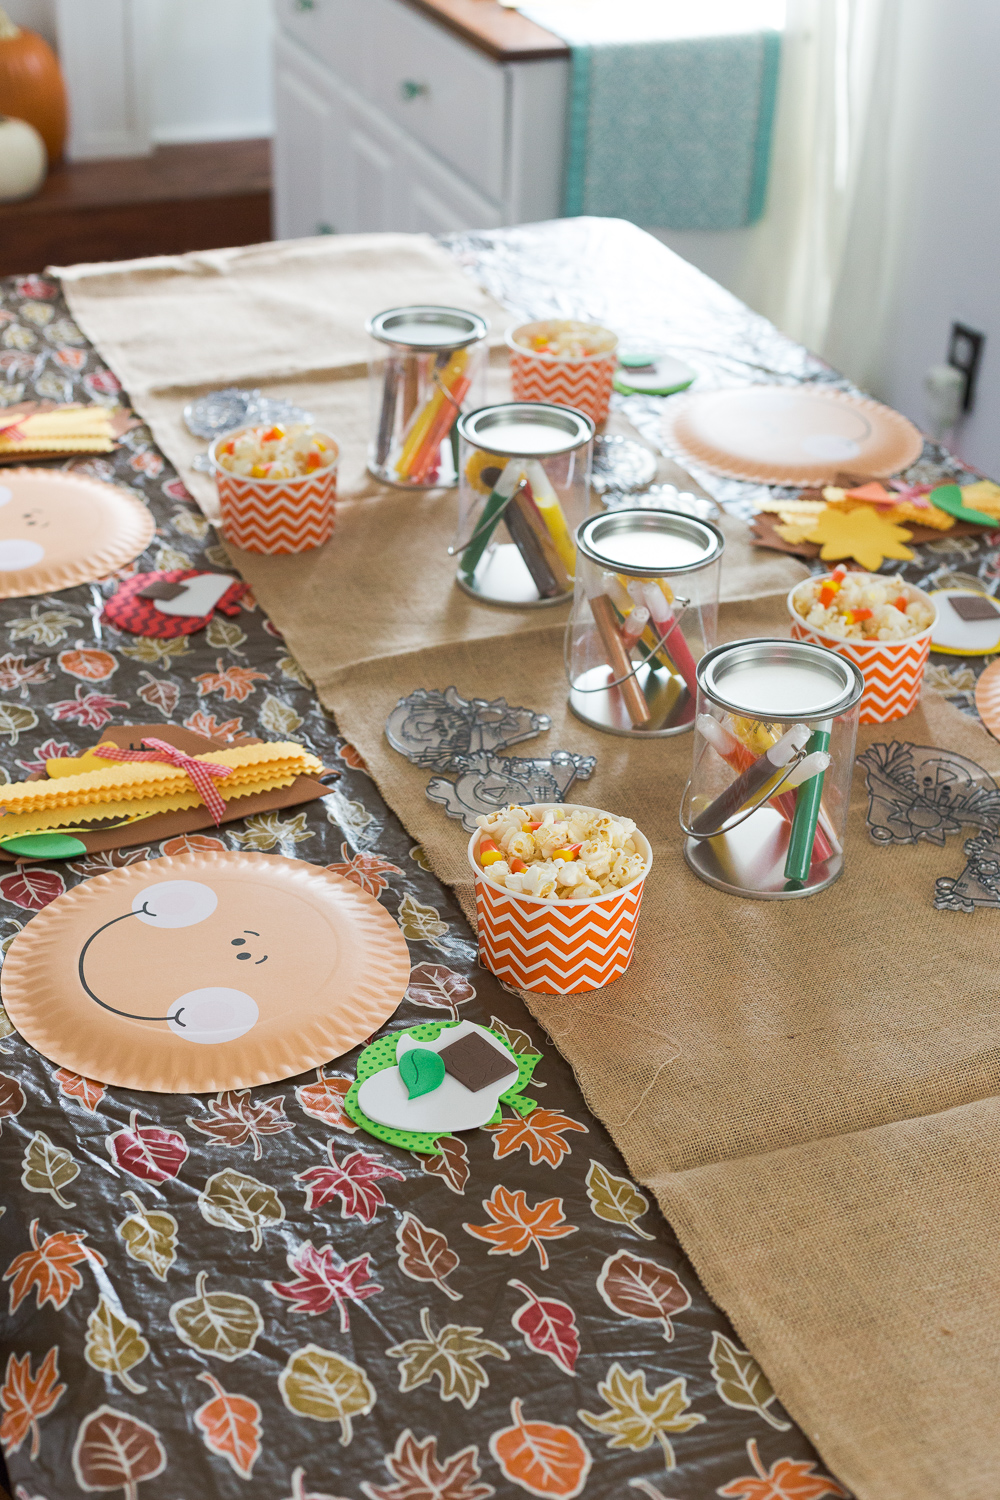 Fall Kids Craft Party: welcome the cooler weather with a day filled of crafts just for the kids! Scarecrows, apples and treats make this party one the kids will love!